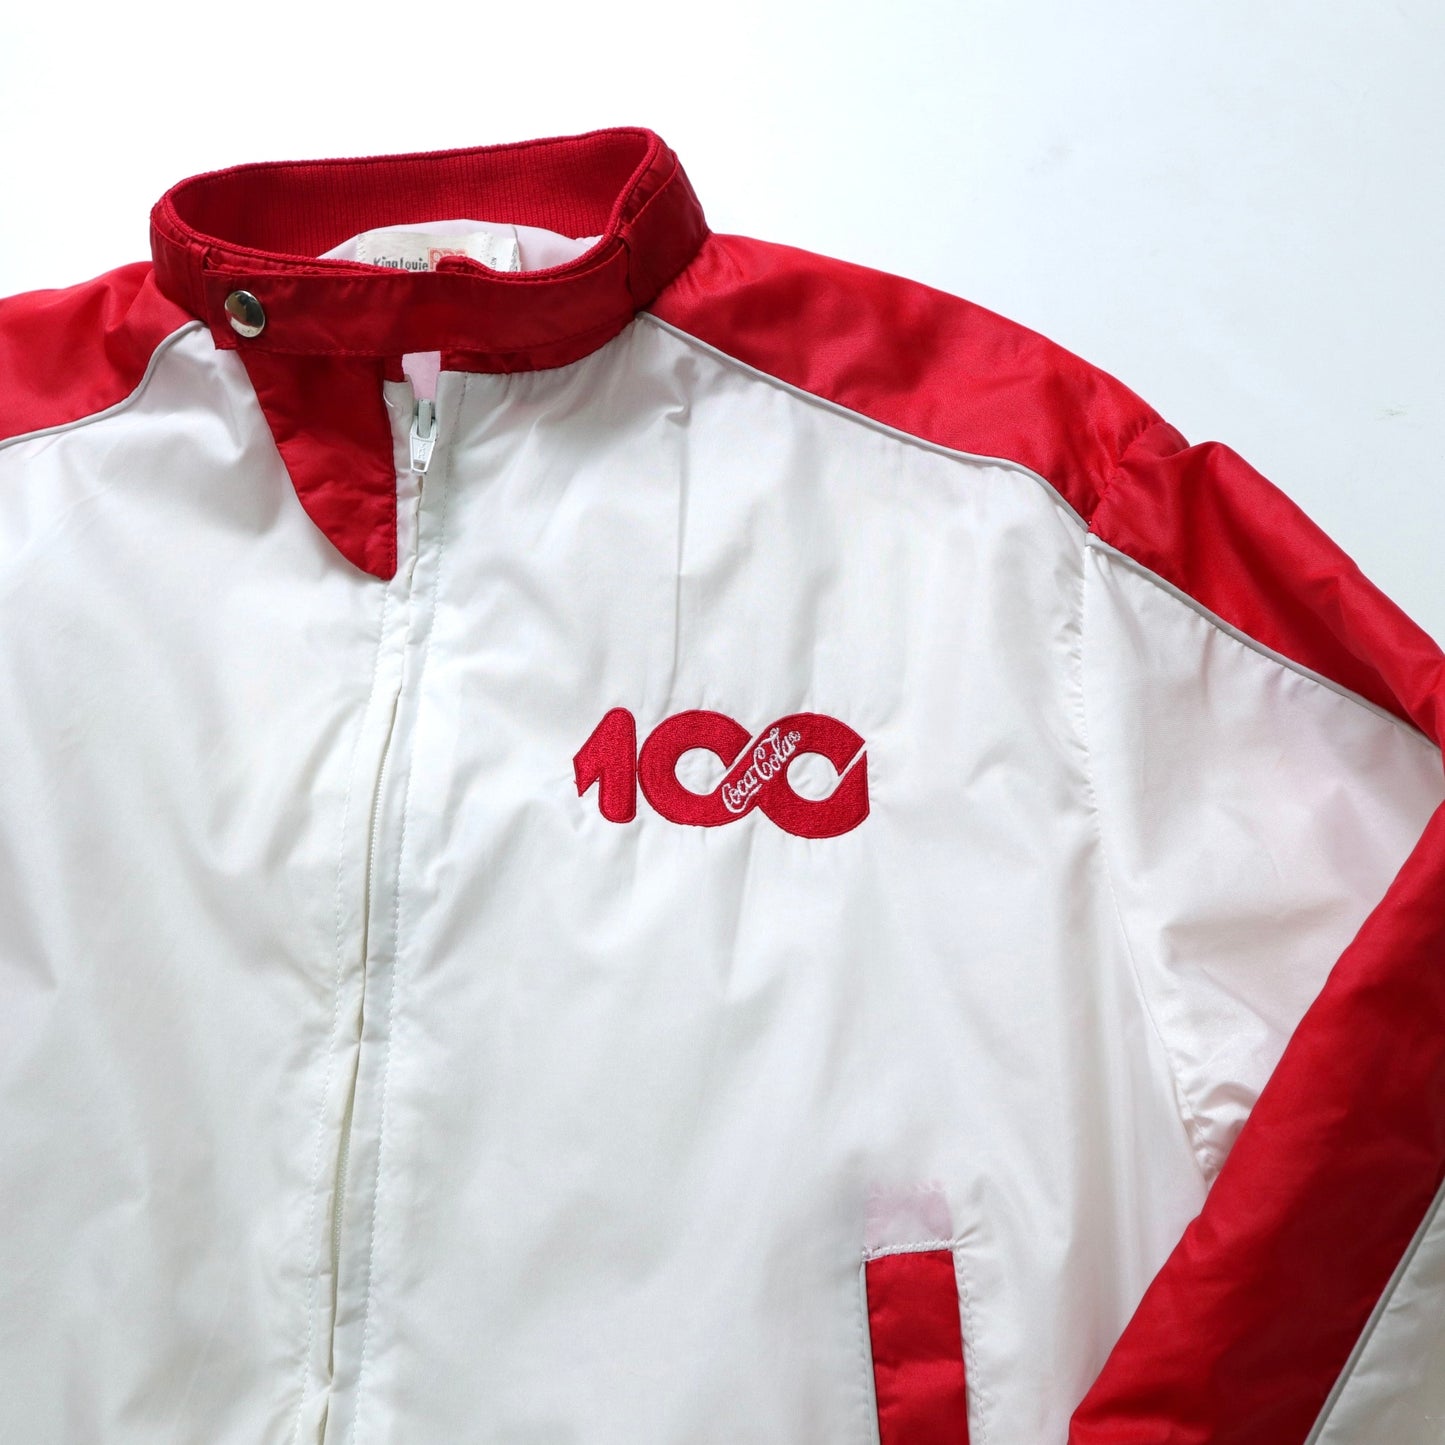 1980s King Louie Coca-Cola 100th Anniversary Windproof Jacket